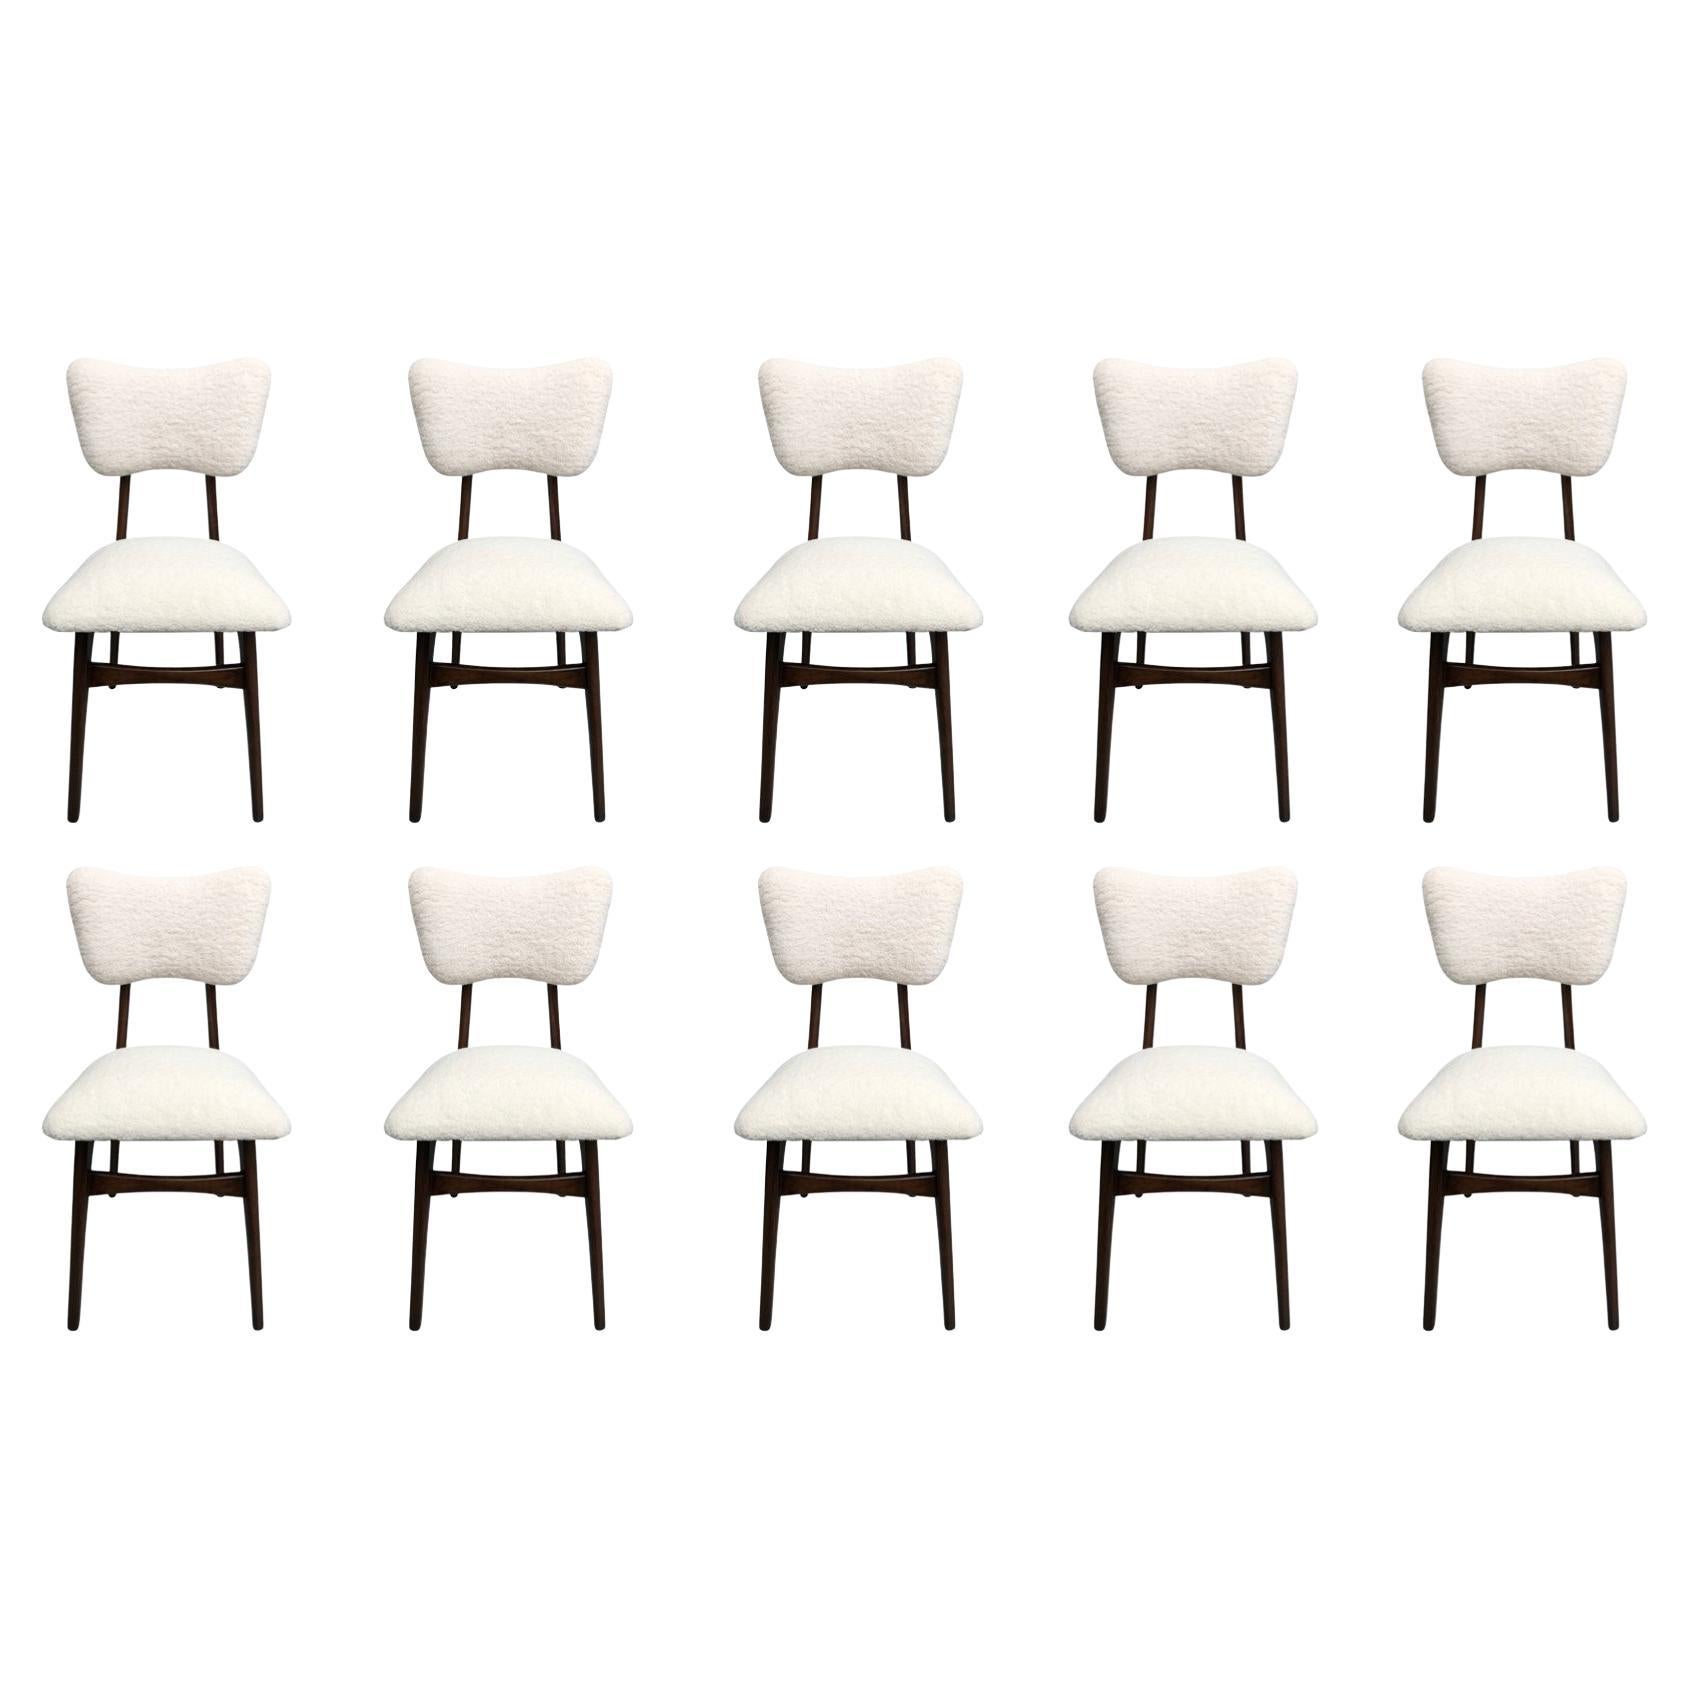 Set of 10 Mid-Century Cream Boucle Butterfly Chairs, Europe, 1960s For Sale